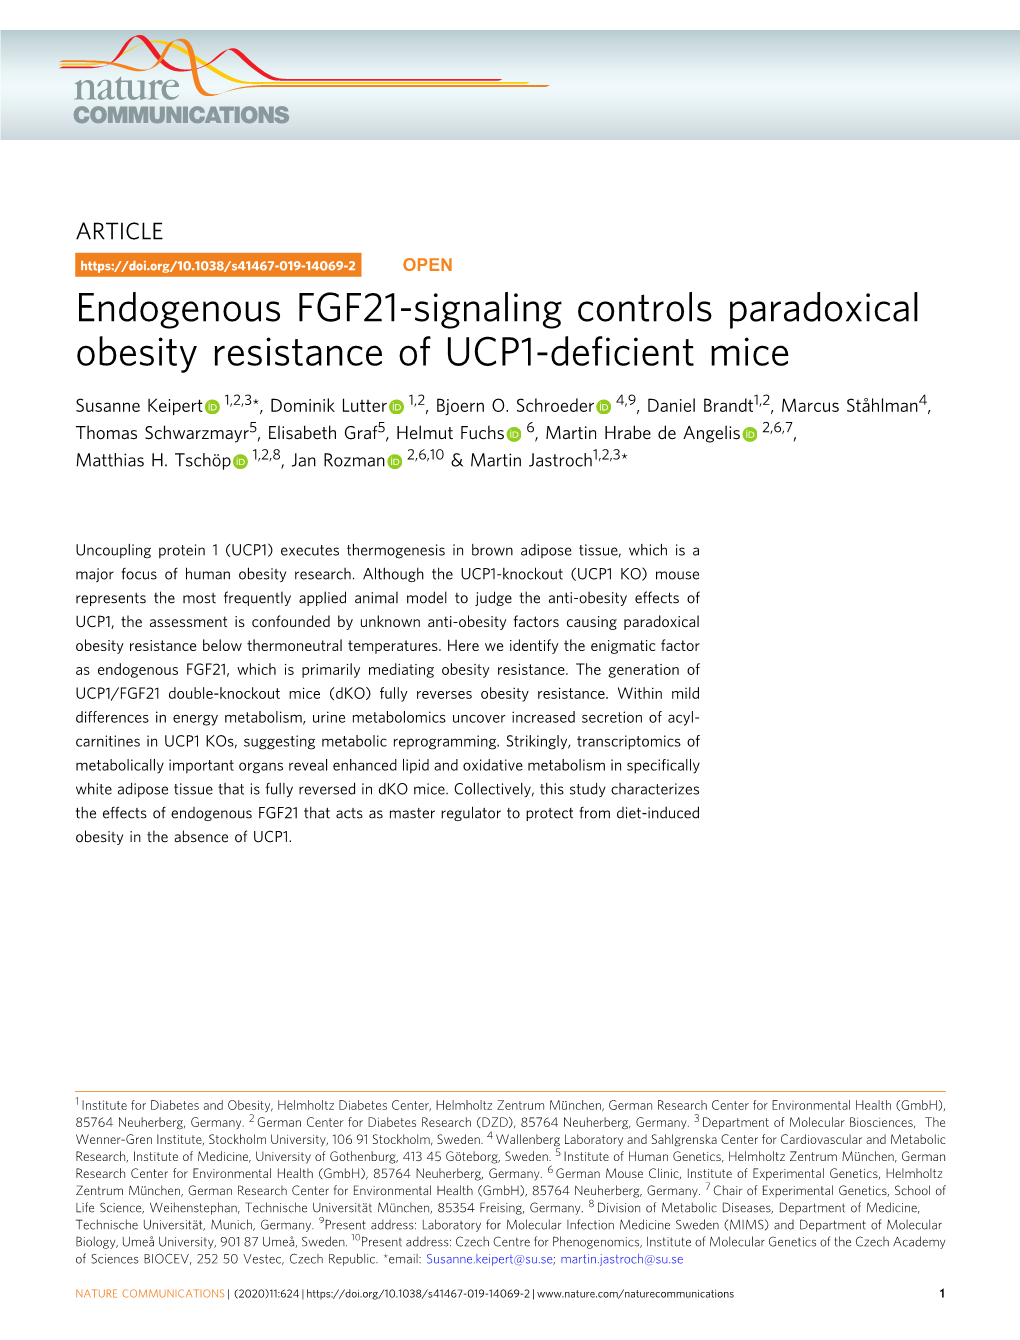 Endogenous FGF21-Signaling Controls Paradoxical Obesity Resistance of UCP1-Deﬁcient Mice